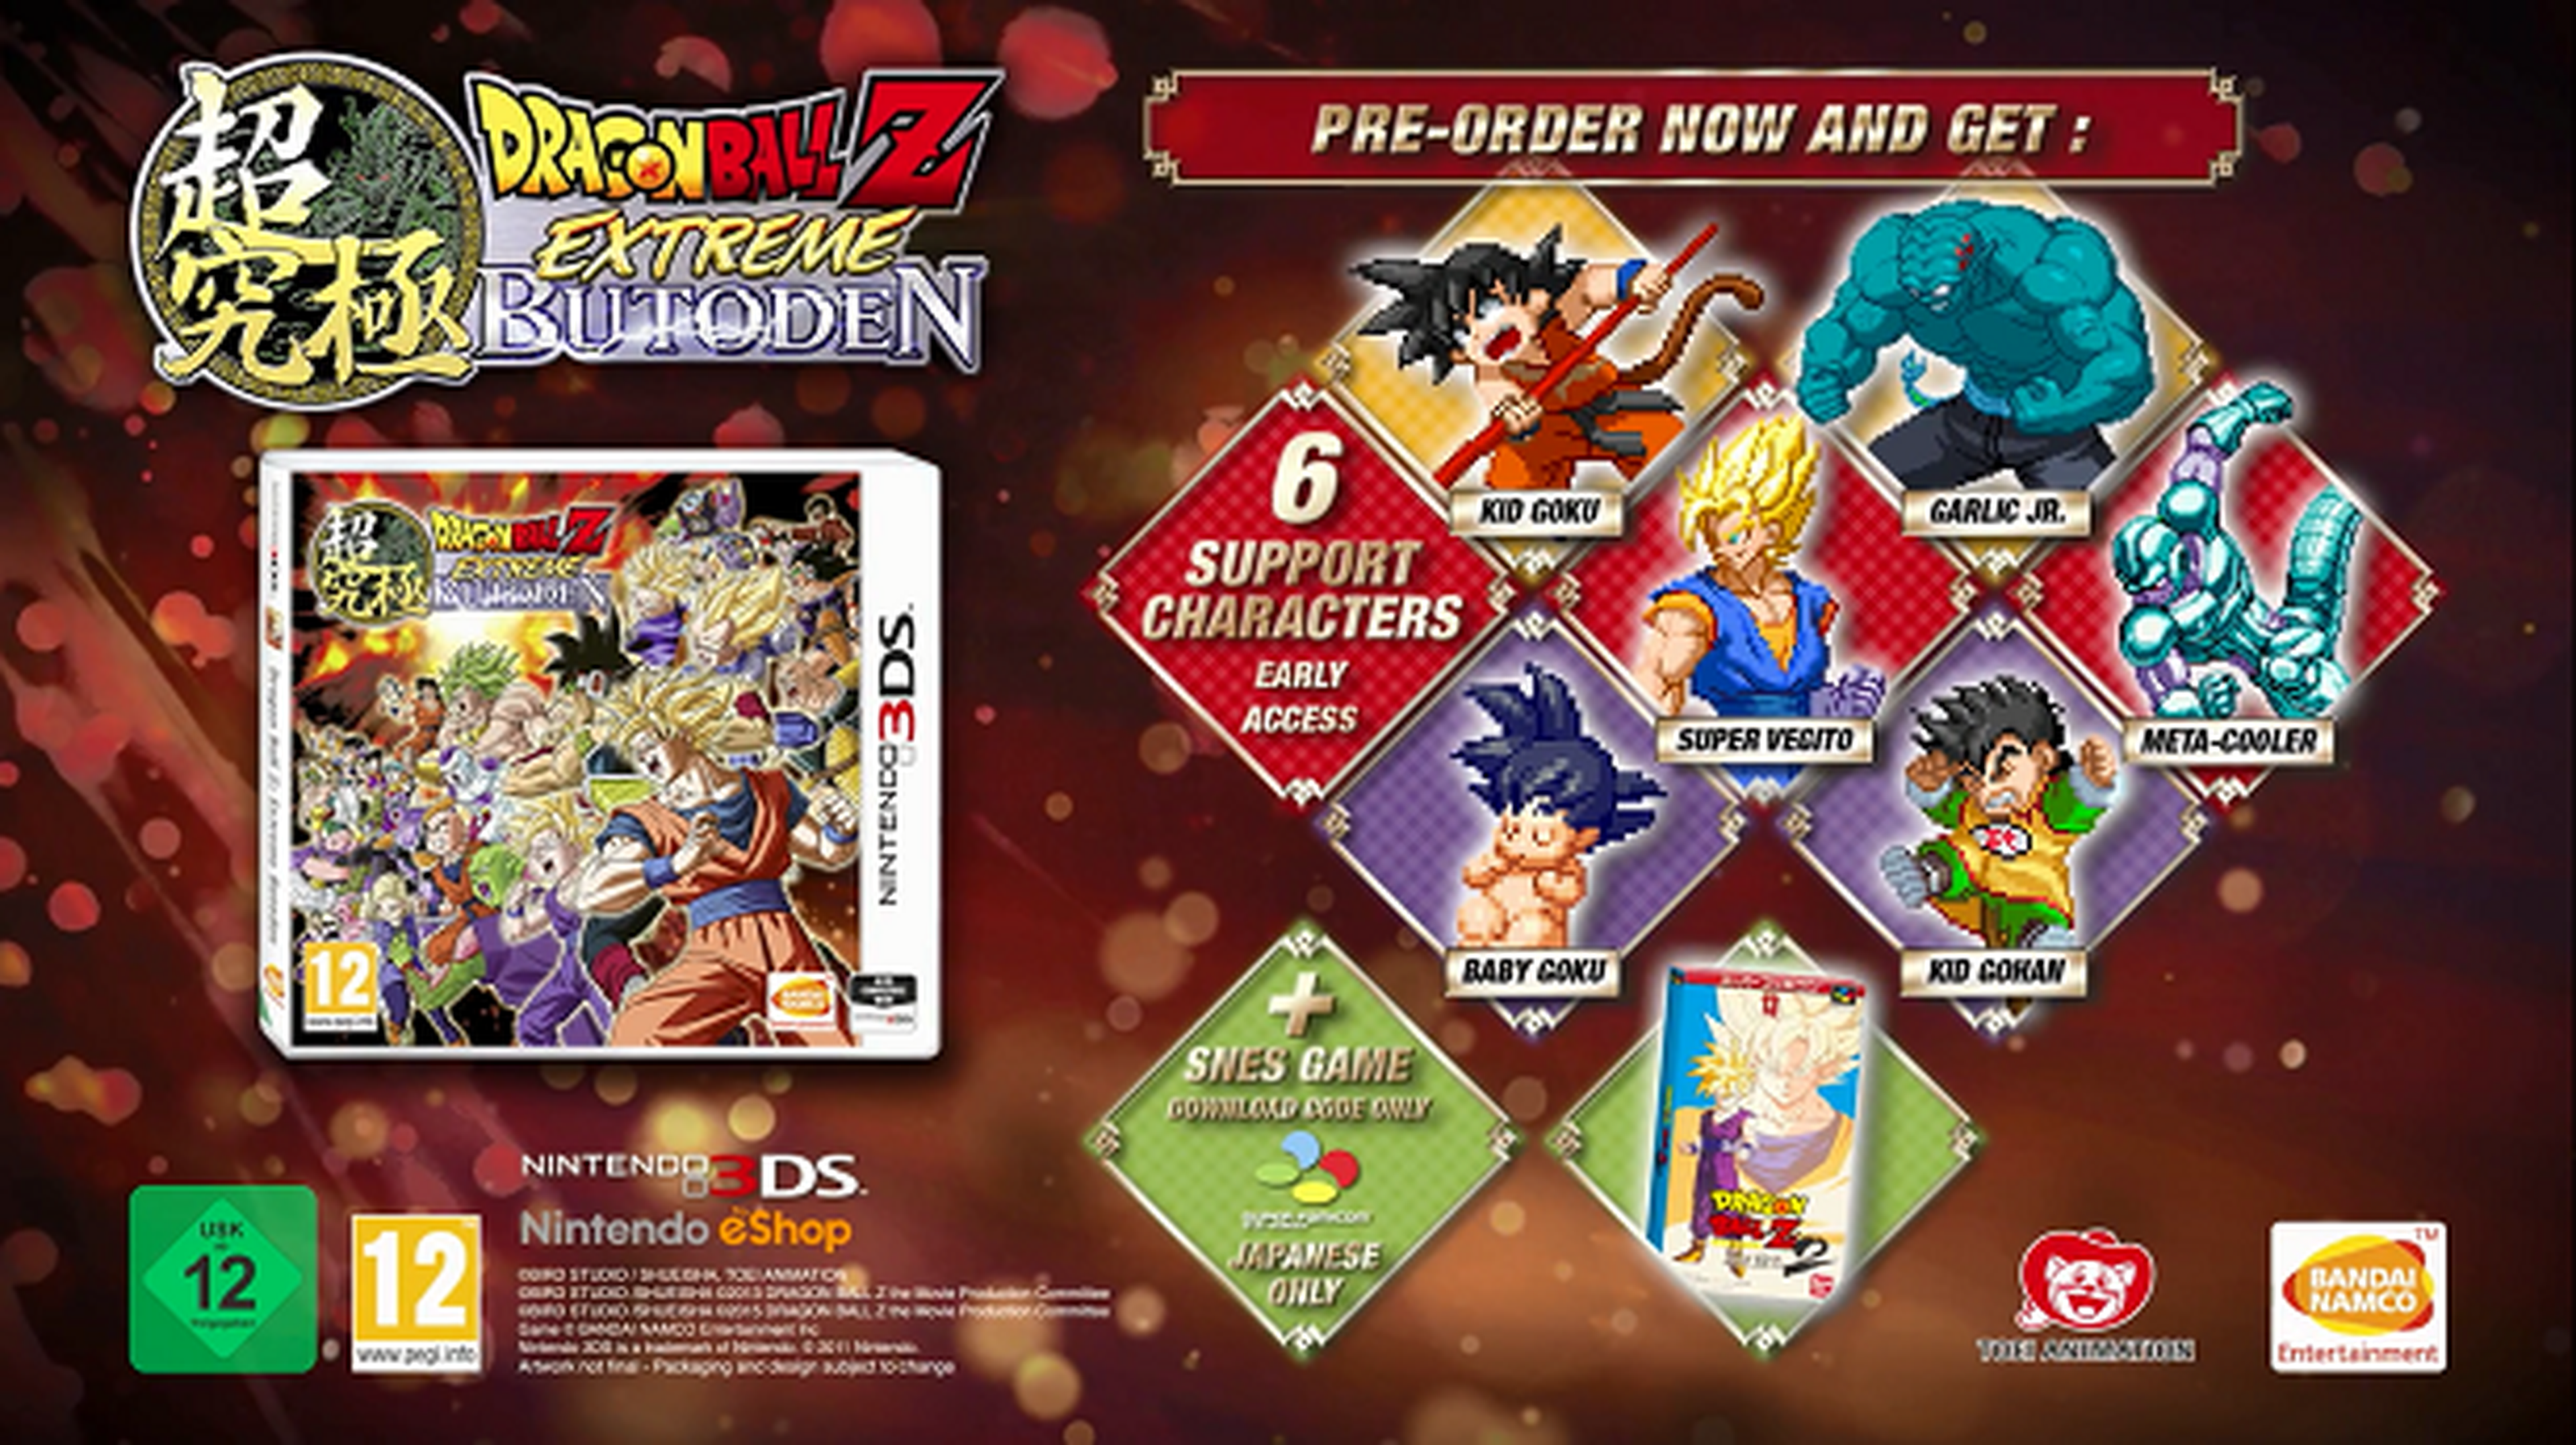 Dragon Ball Z Extreme Butoden, Pack con New Nintendo 3DS